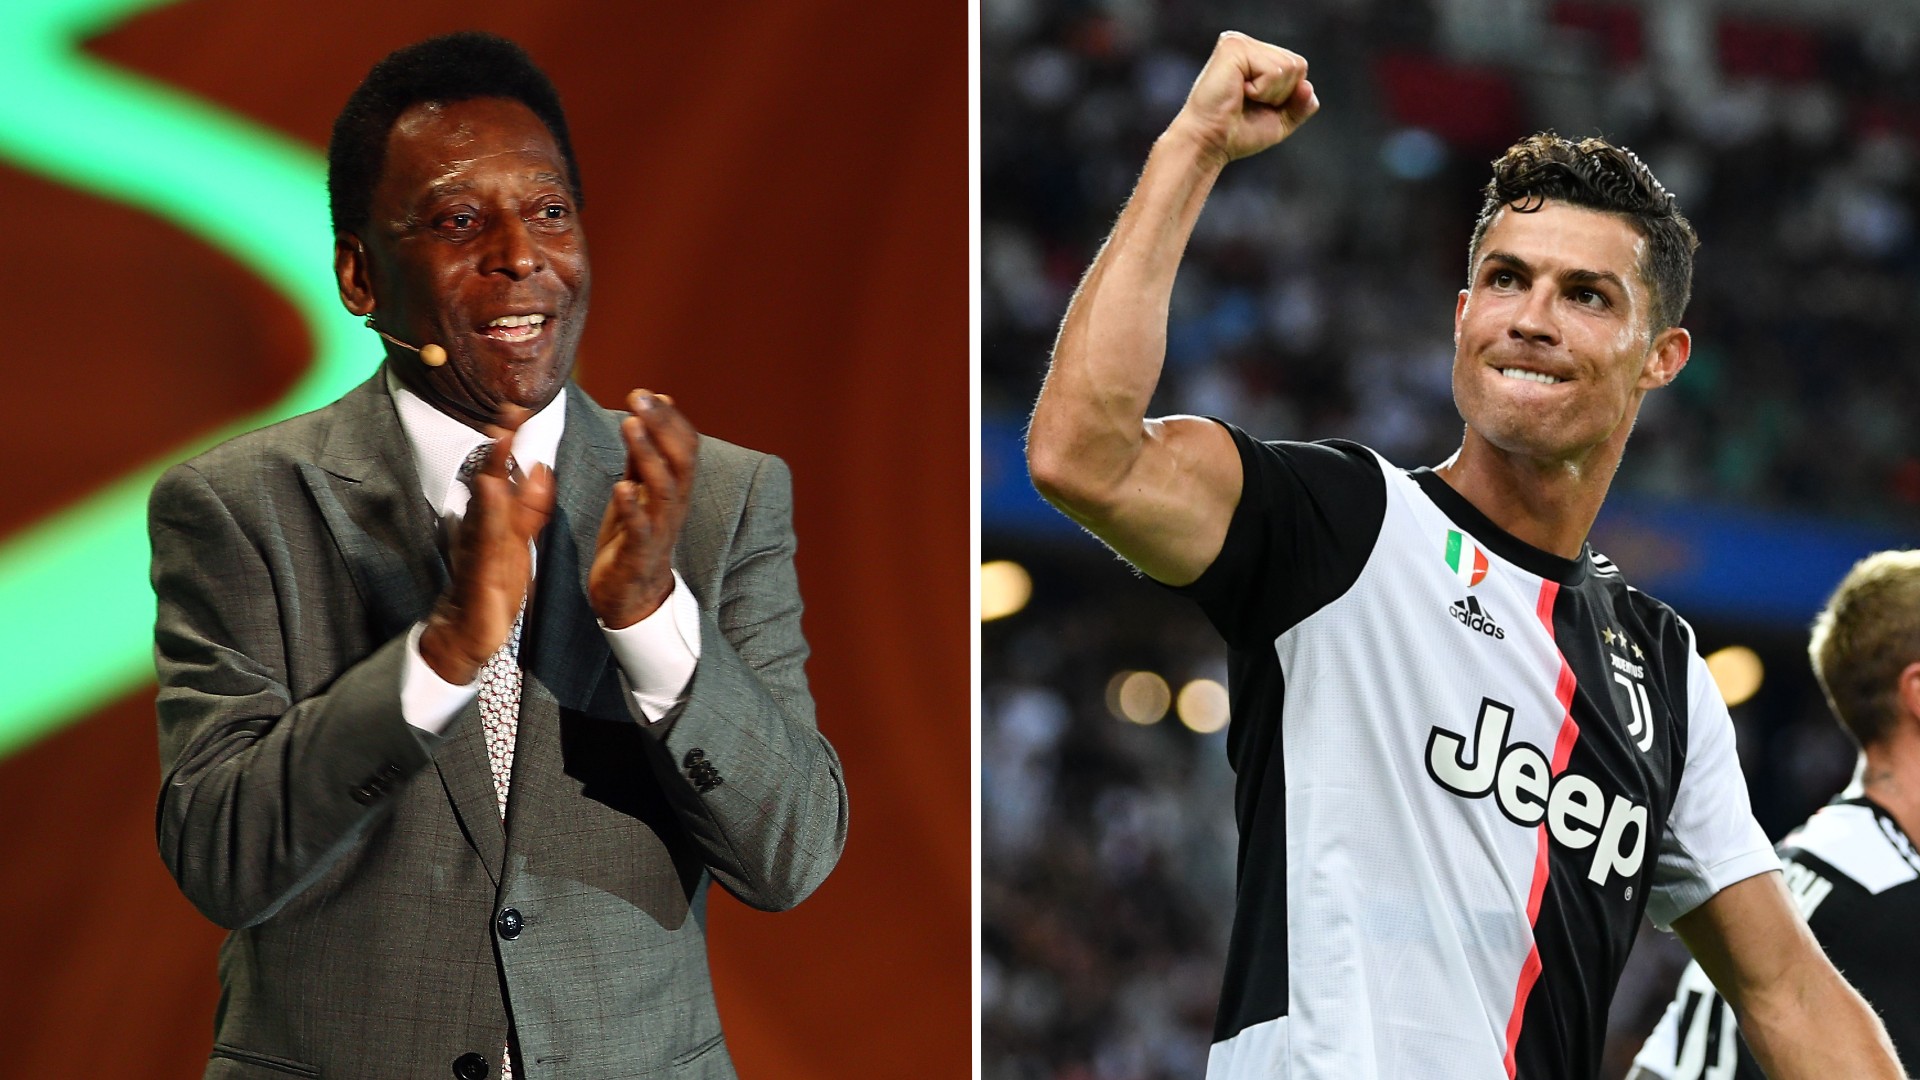 Ronaldo is the ‘modern athlete’, says Pele, after seeing Juventus superstar capture Serie A crown